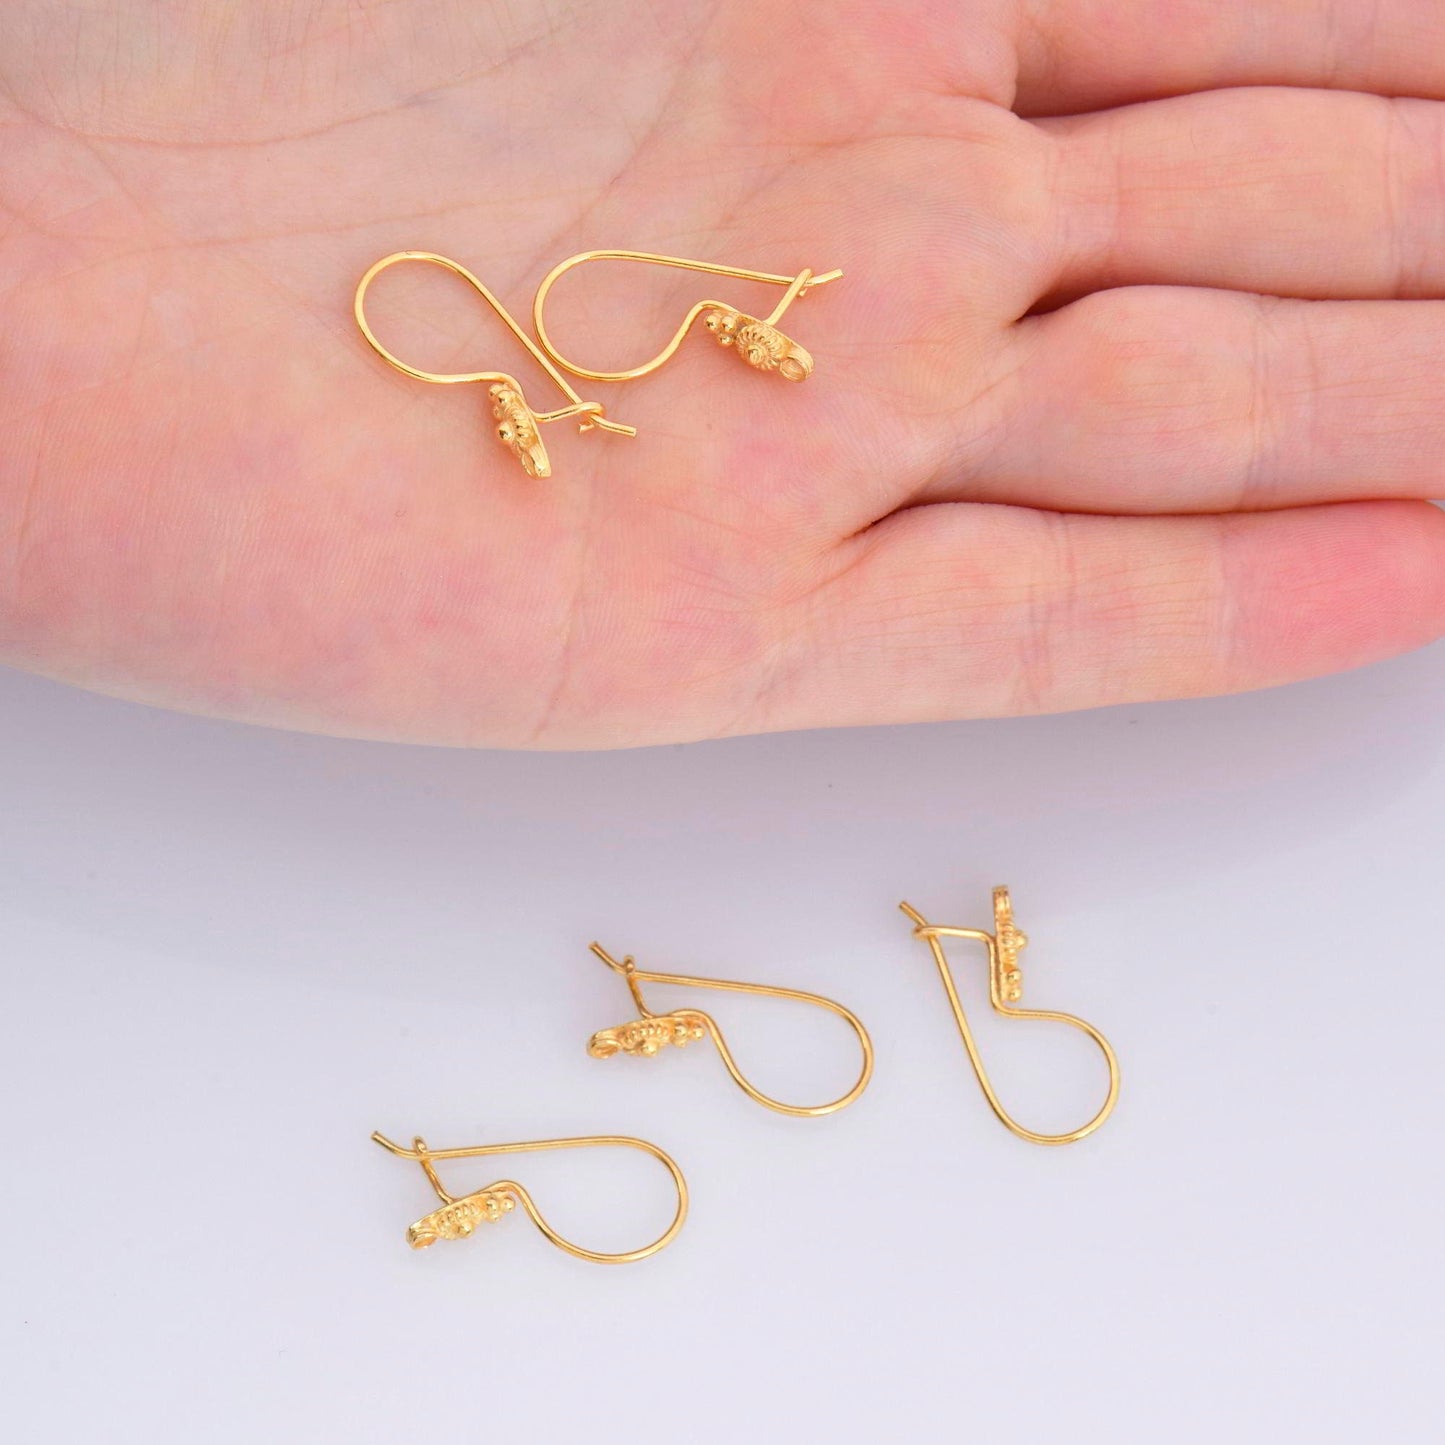 24K Gold Vermeil Ear Wires, Sterling Silver Earring Hooks in 24K Gold, Flower Ear Wires, Earrings Making Supply, Jewelry Findings, M40/VM40